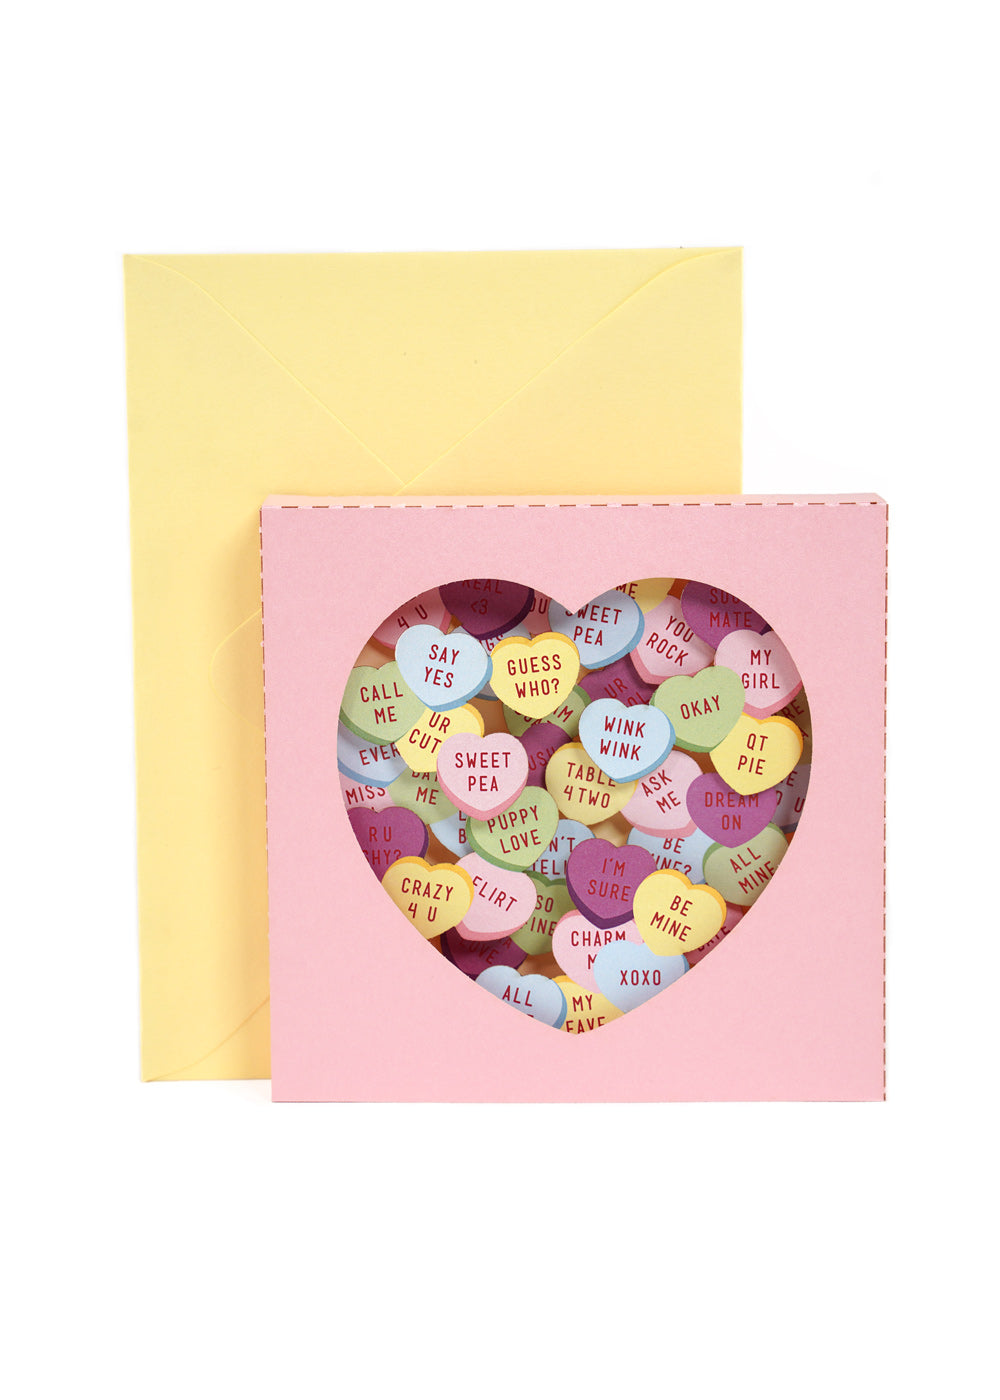 Classic Valentine's Day Candy Conversation Hearts Acrylic Print by